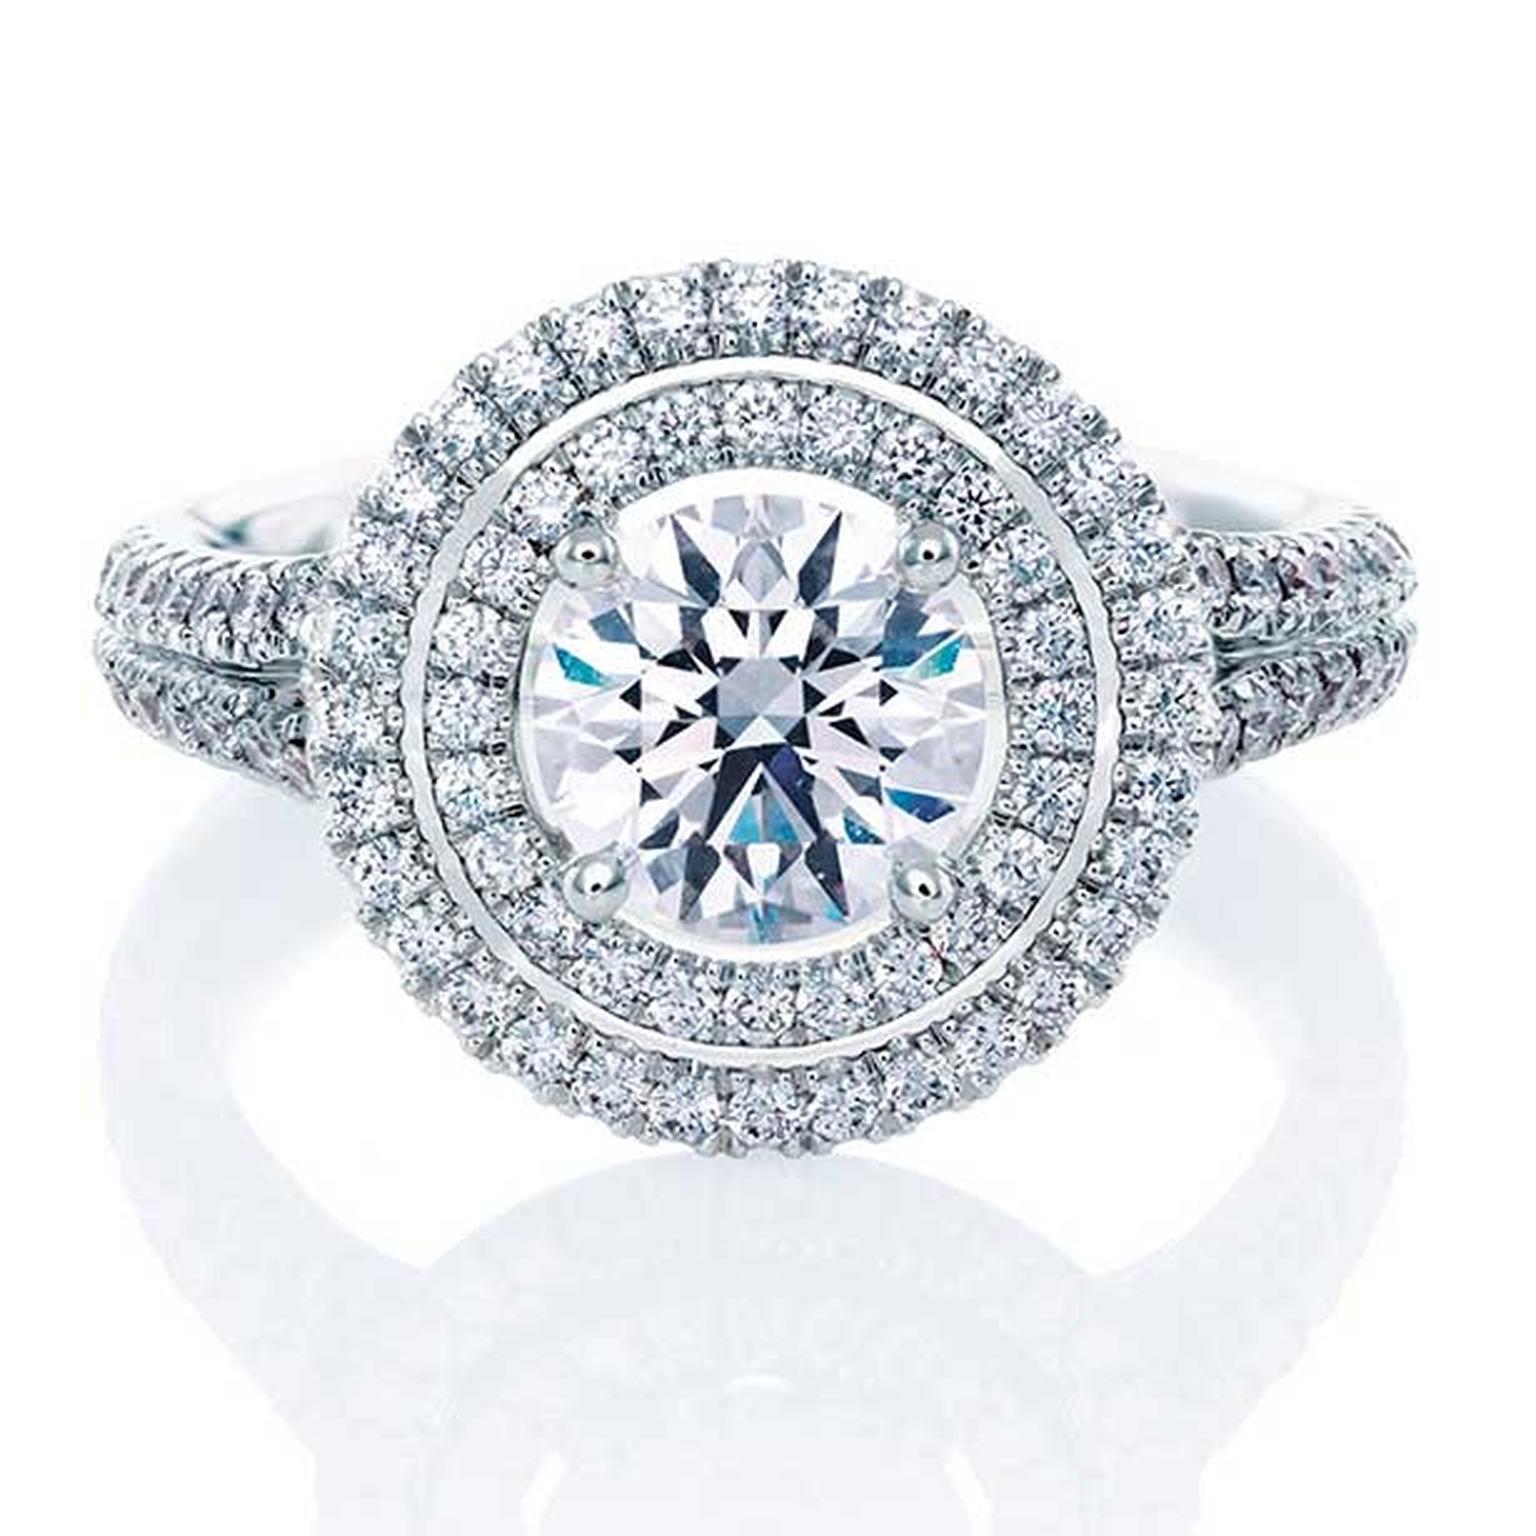 De Beers Aura Double Halo ring in platinum, set with a